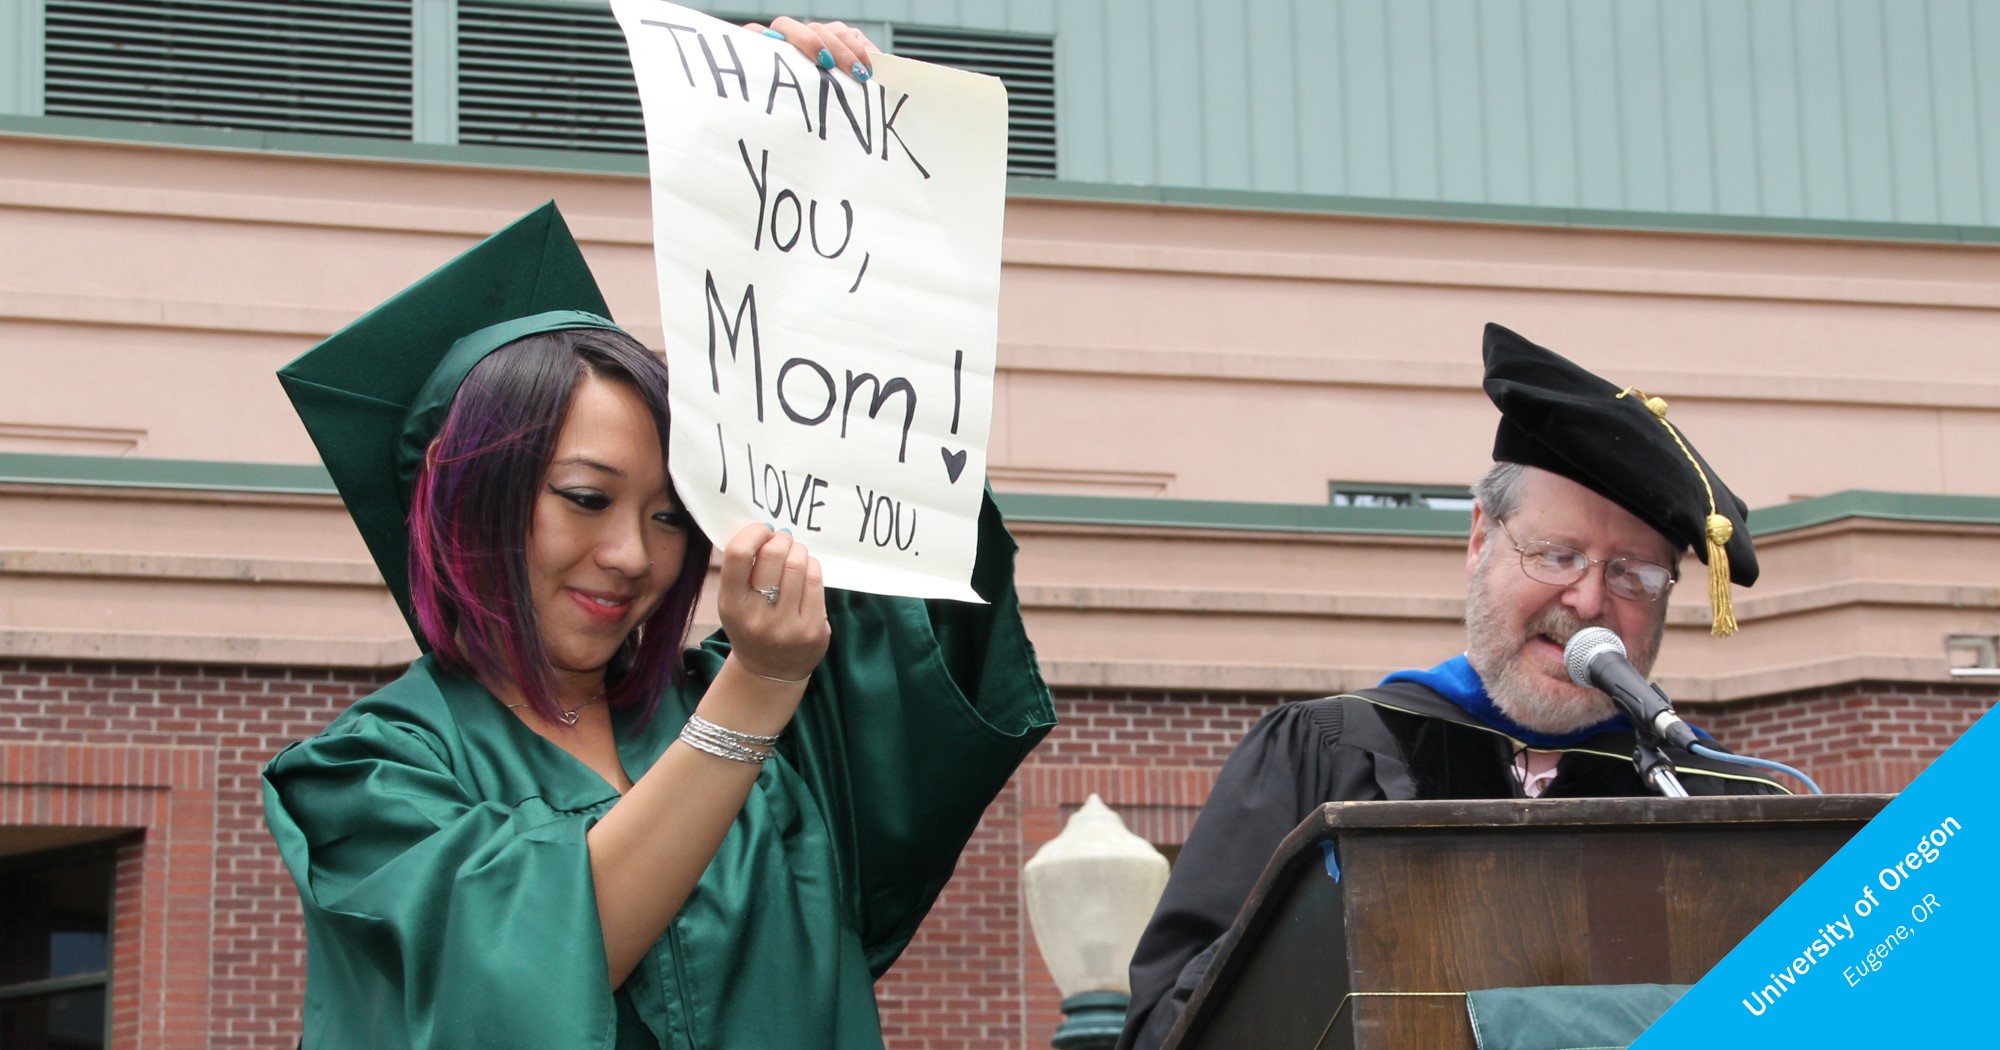 Asian female graduate holding a sign that says "Thank you, Mom. I love you."